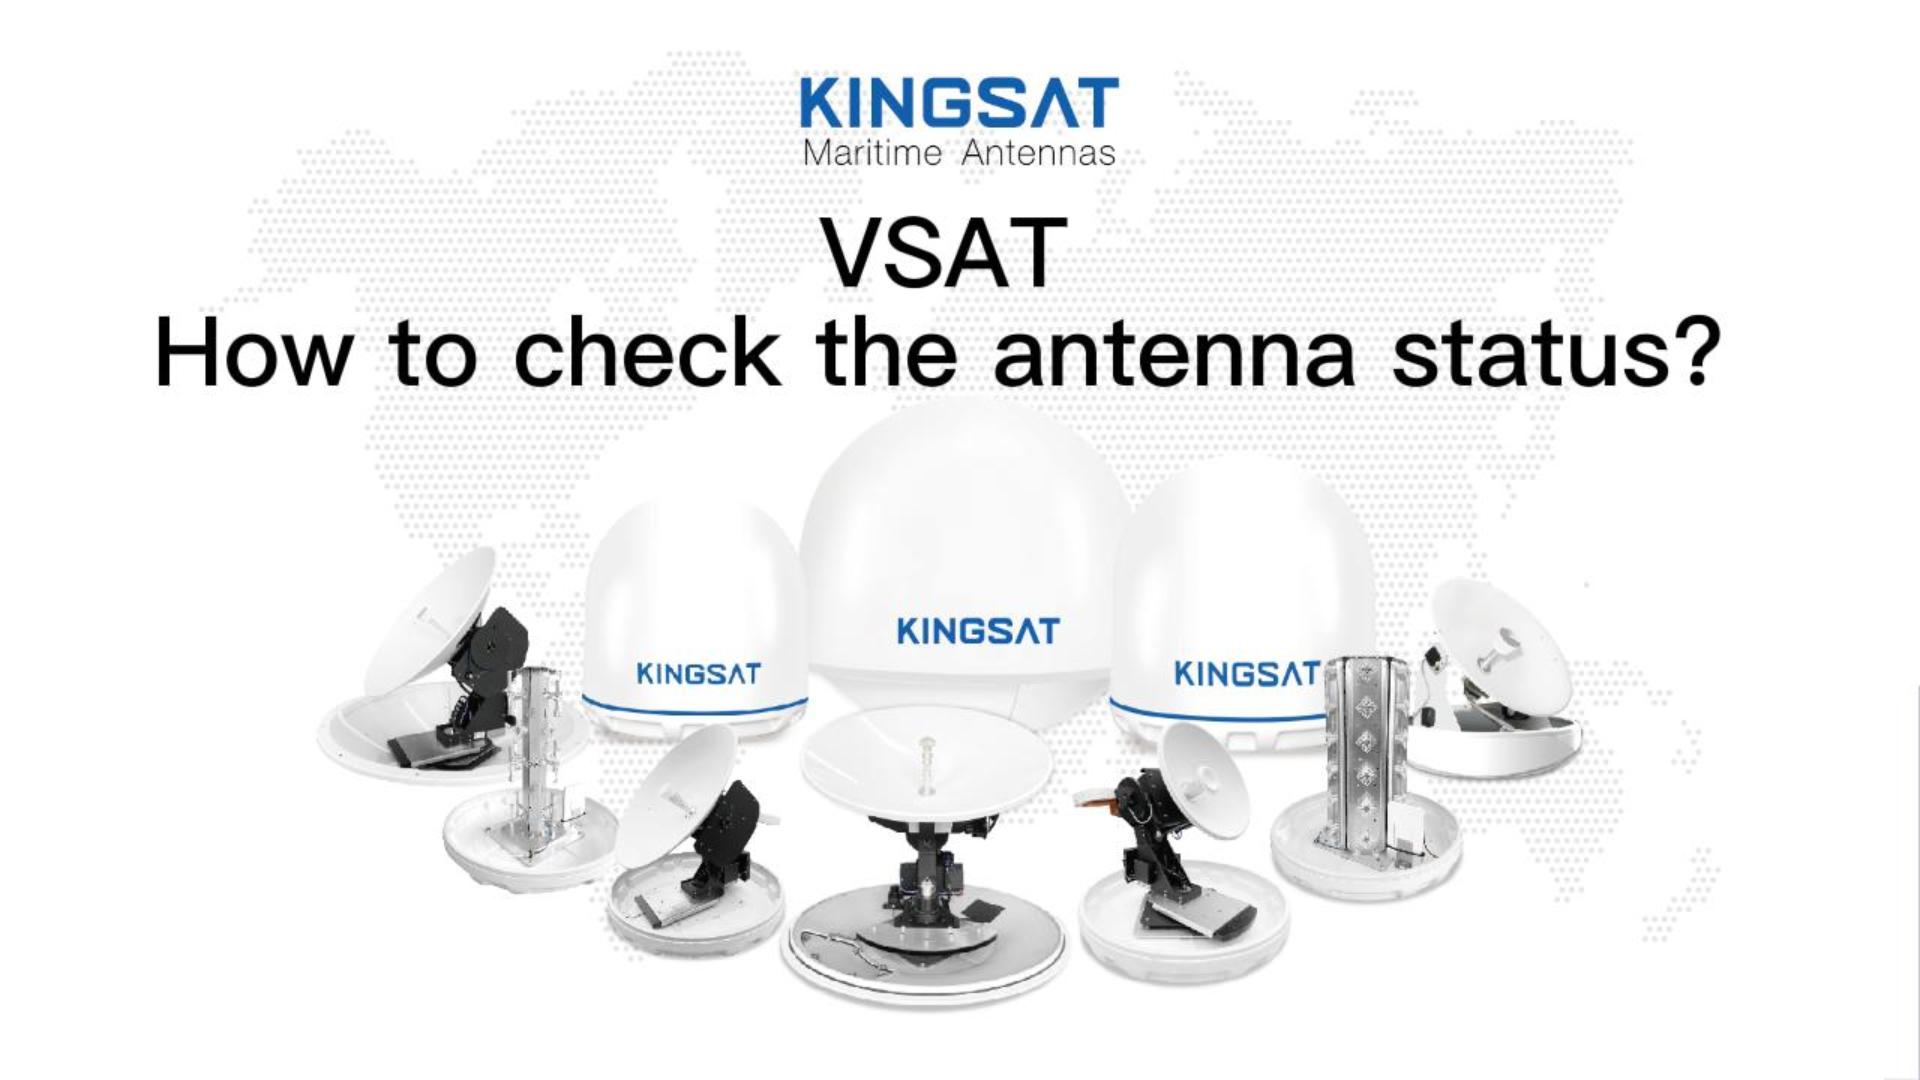 How to check the antenna status?